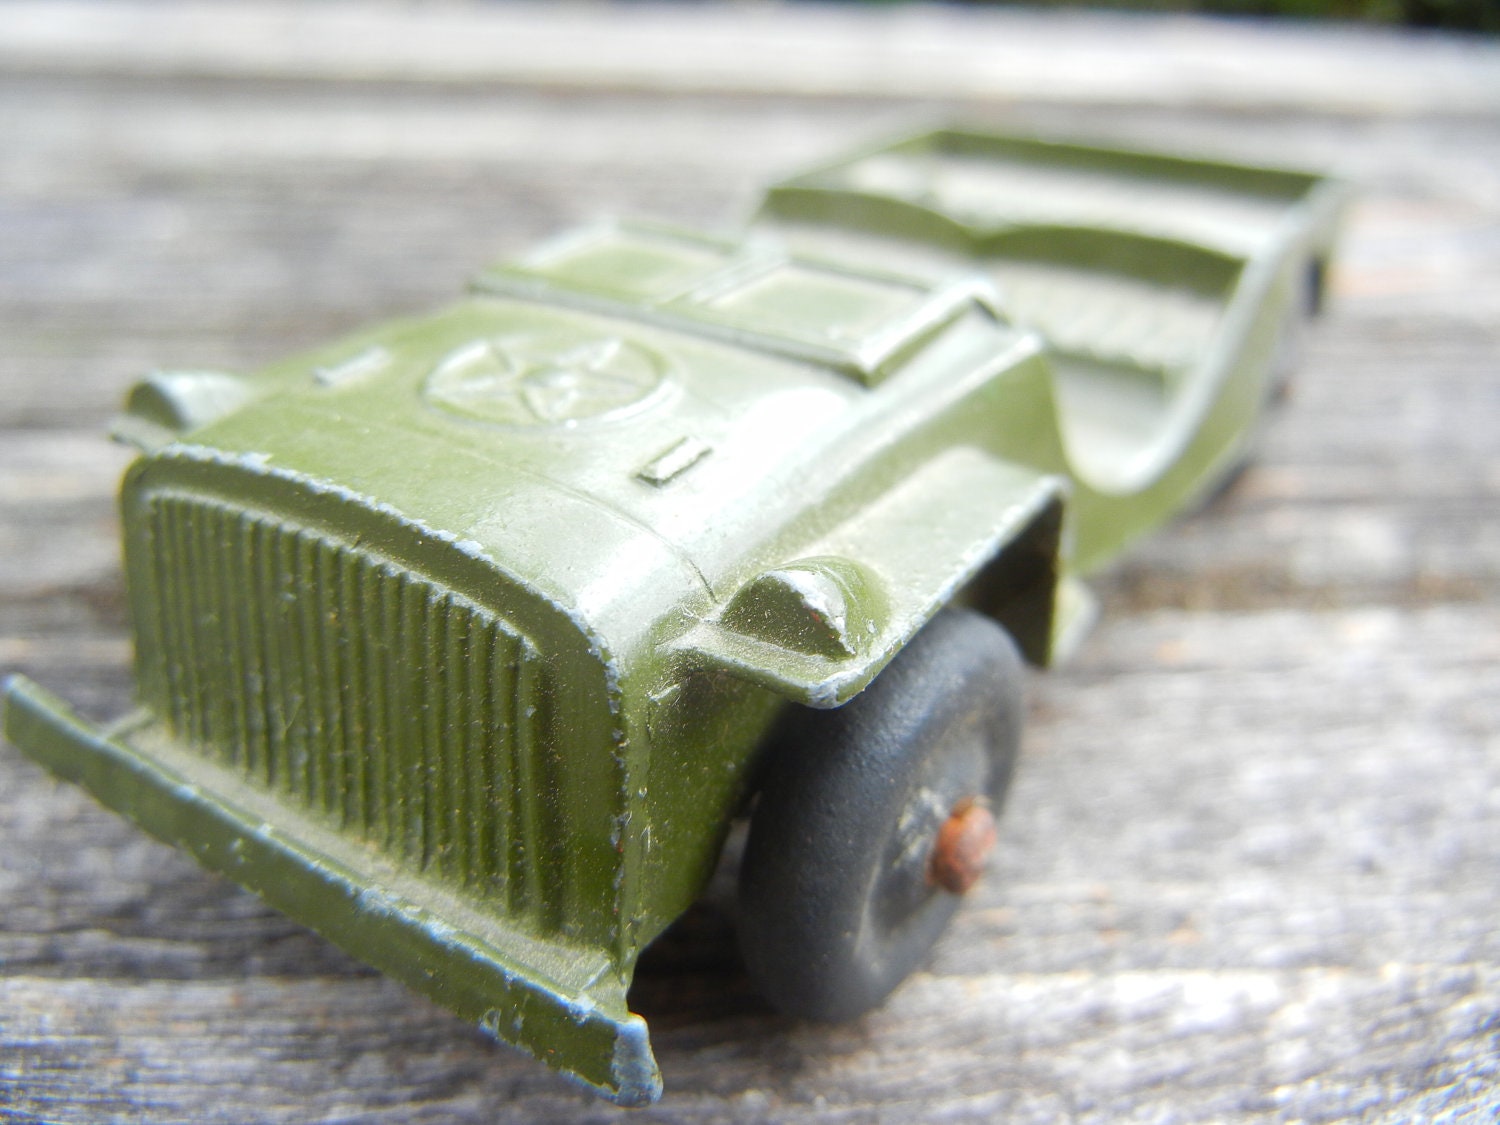 Antique toy army jeep #5